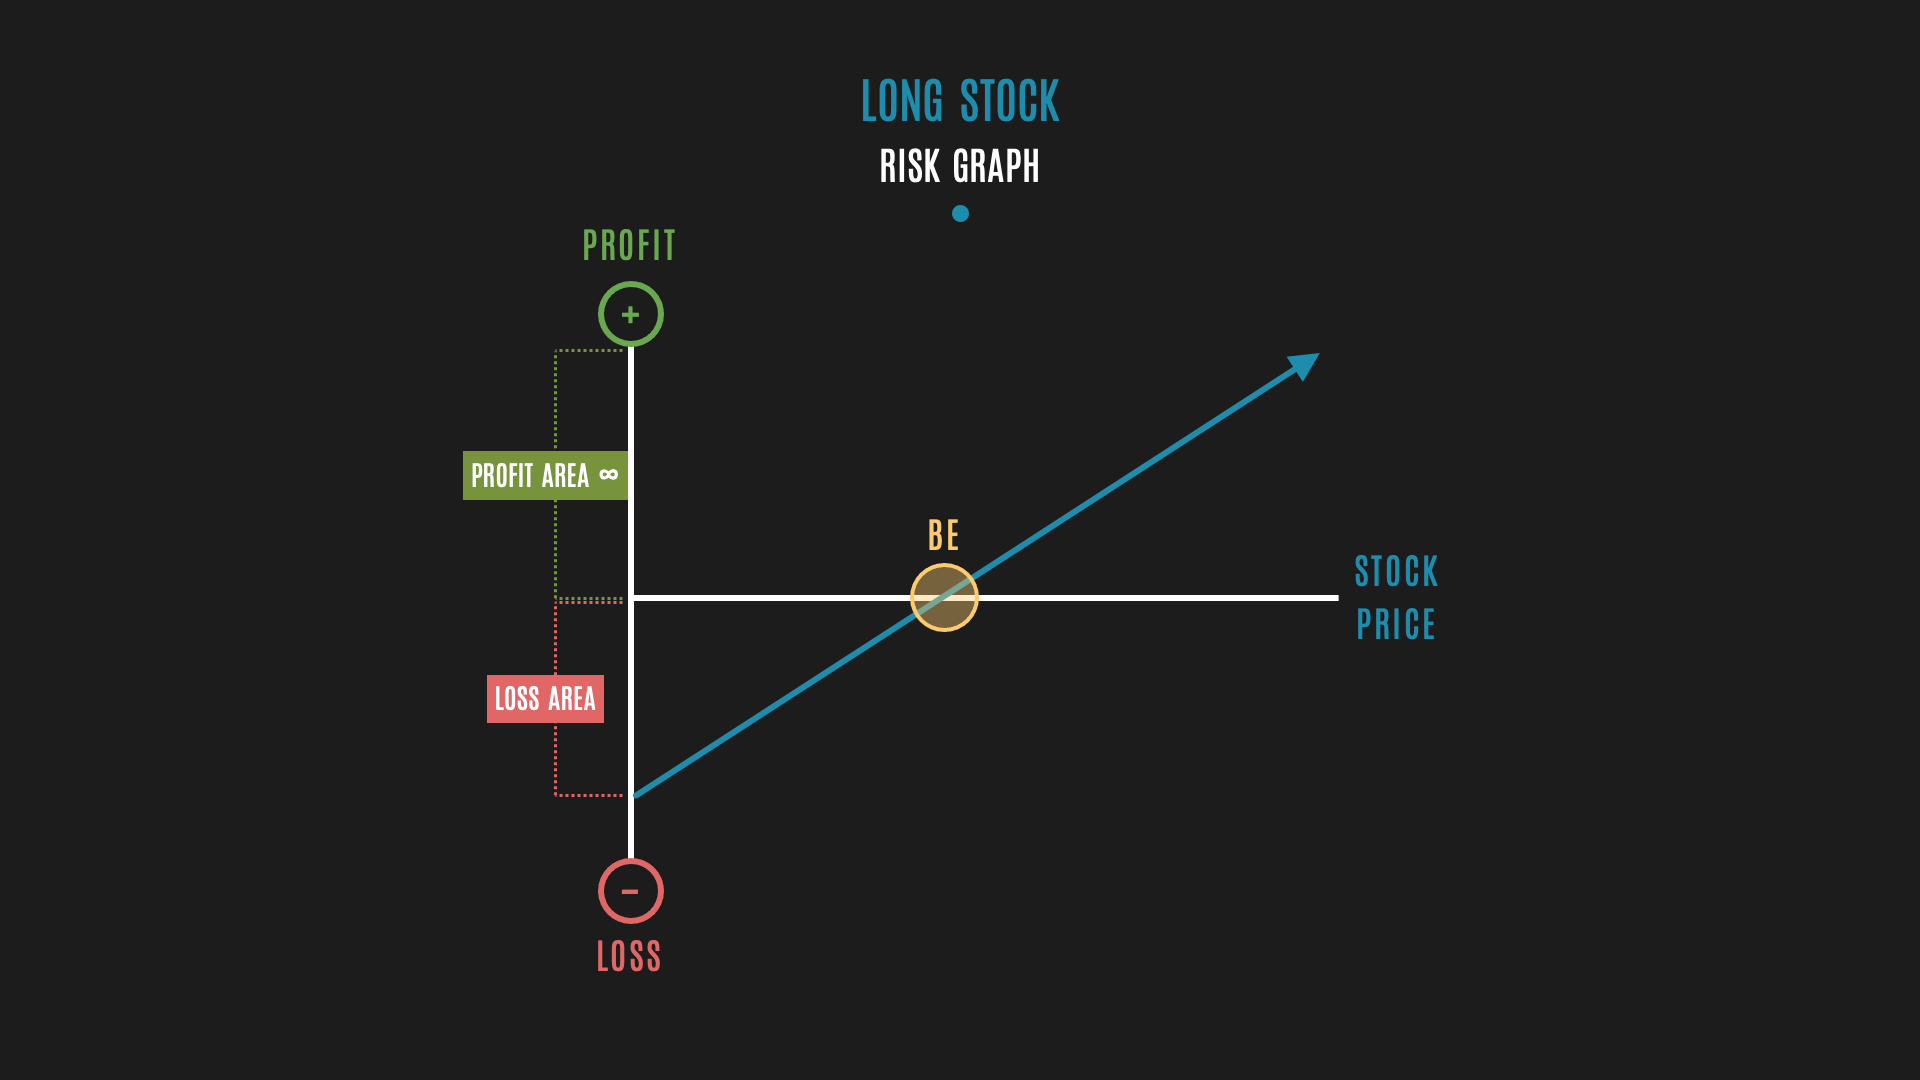 Long Stock Risk Graph: Note how you have unlimited upside, but open-ended downside.